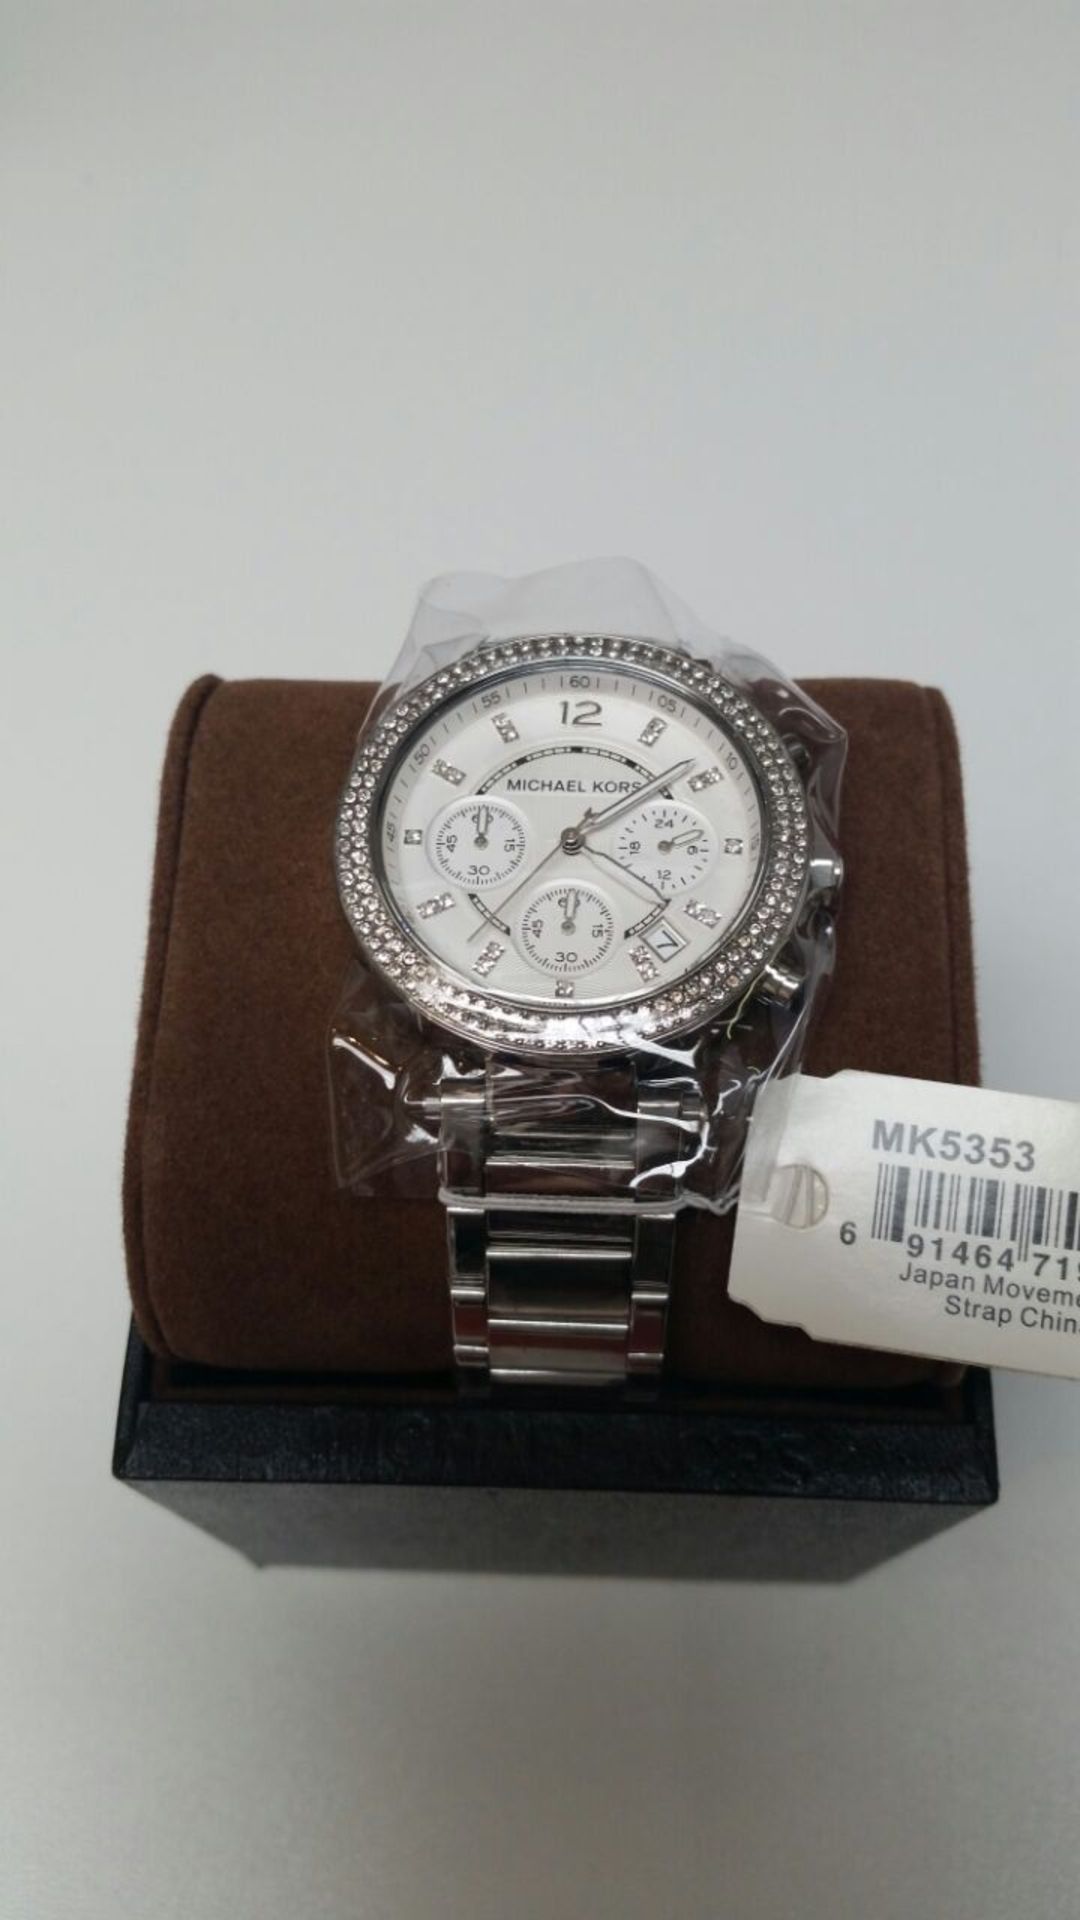 BRAND NEW MICHAEL KORS MK5353, LADIES SILVER COLORED PARKER CHRONOGRAPH WATCH - RRP £329.99. FREE